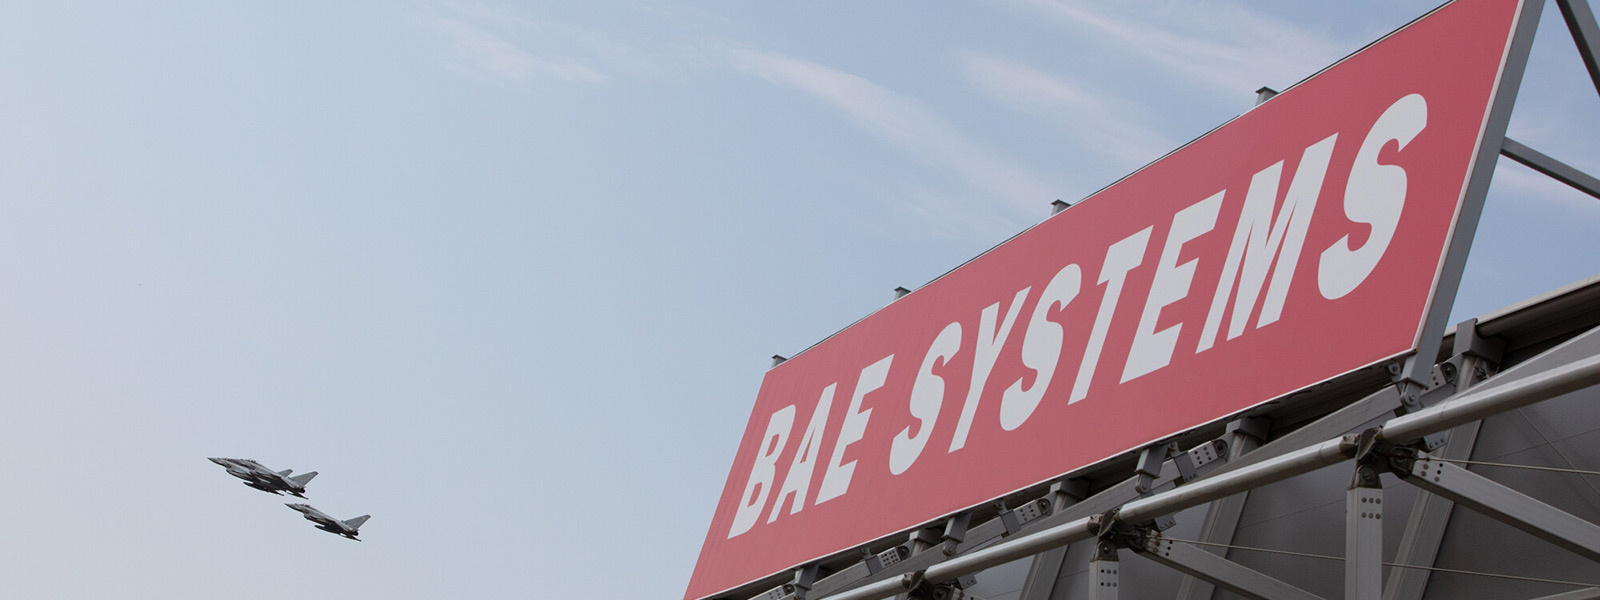 BAE Systems logo on Hall 5 at Farnborough Airshow 2022 with Eurofighter Typhoons flying in the background